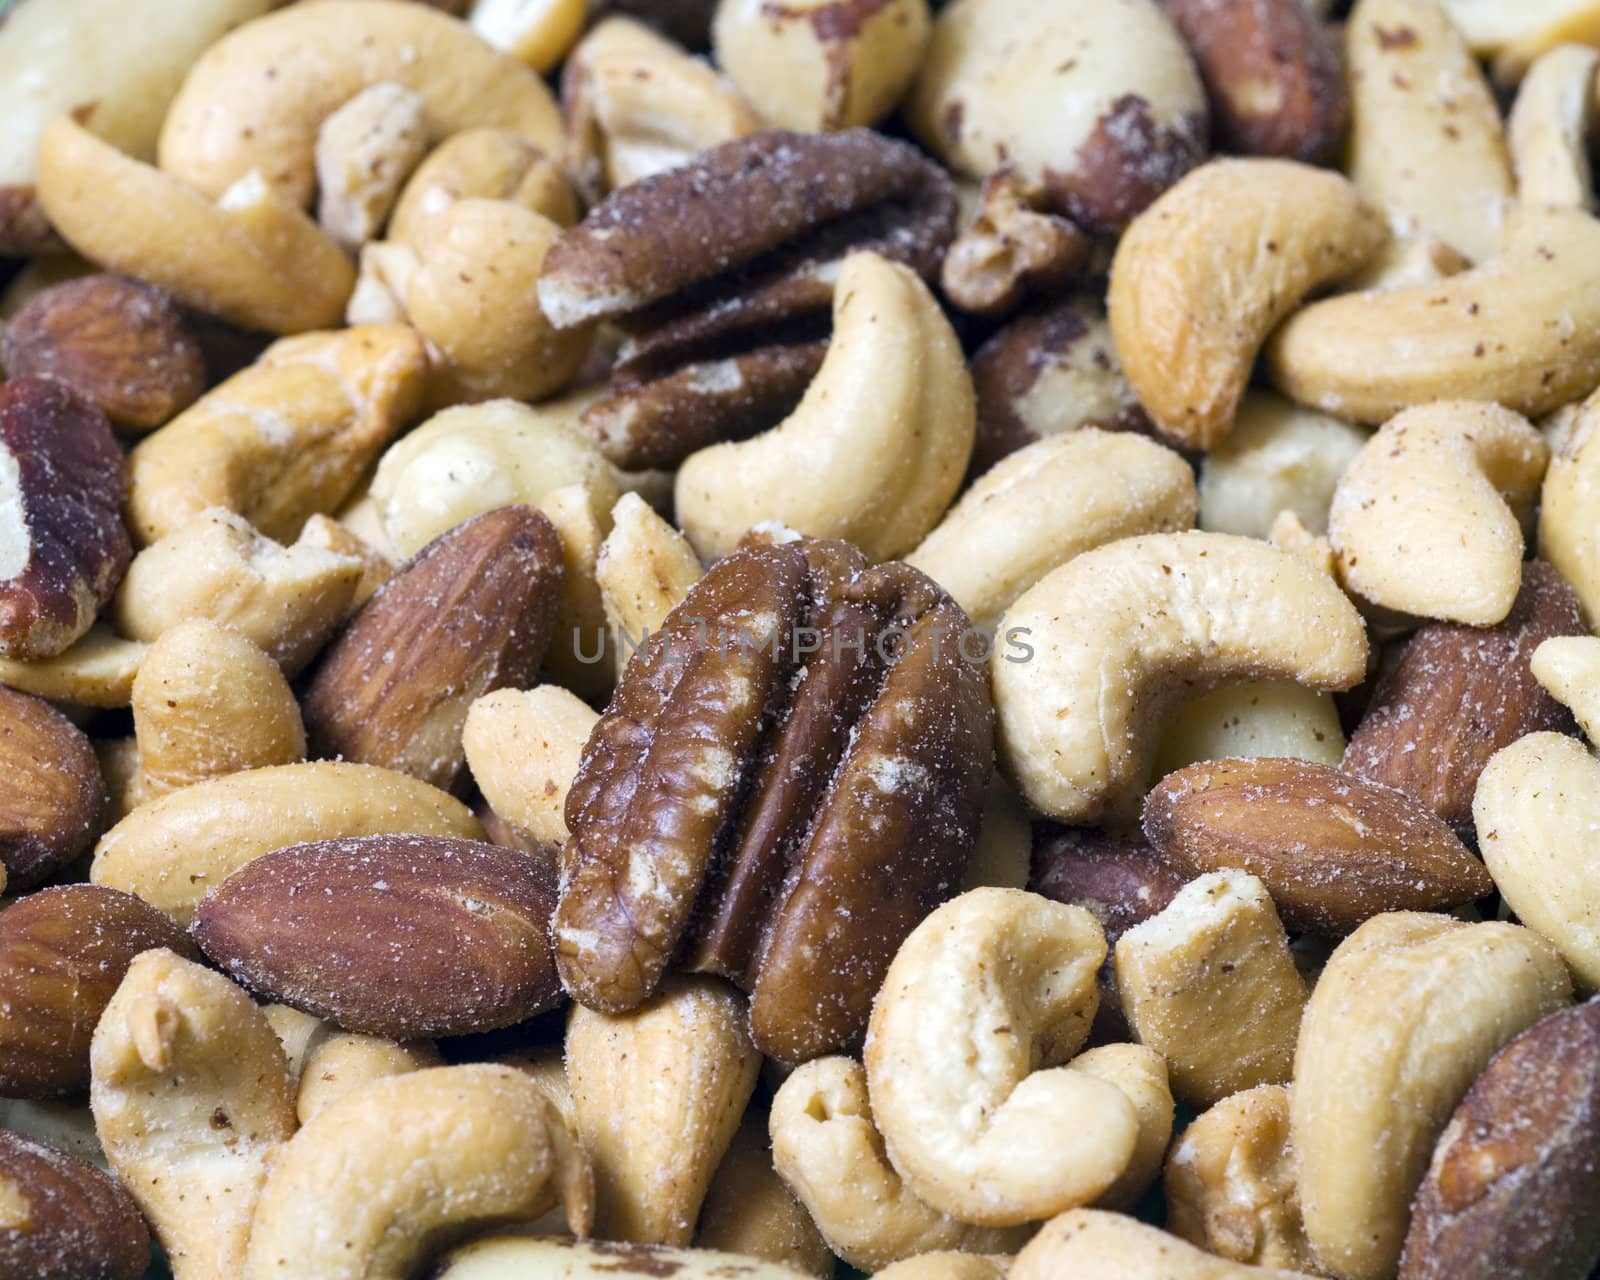 Mixed Nuts by Gordo25